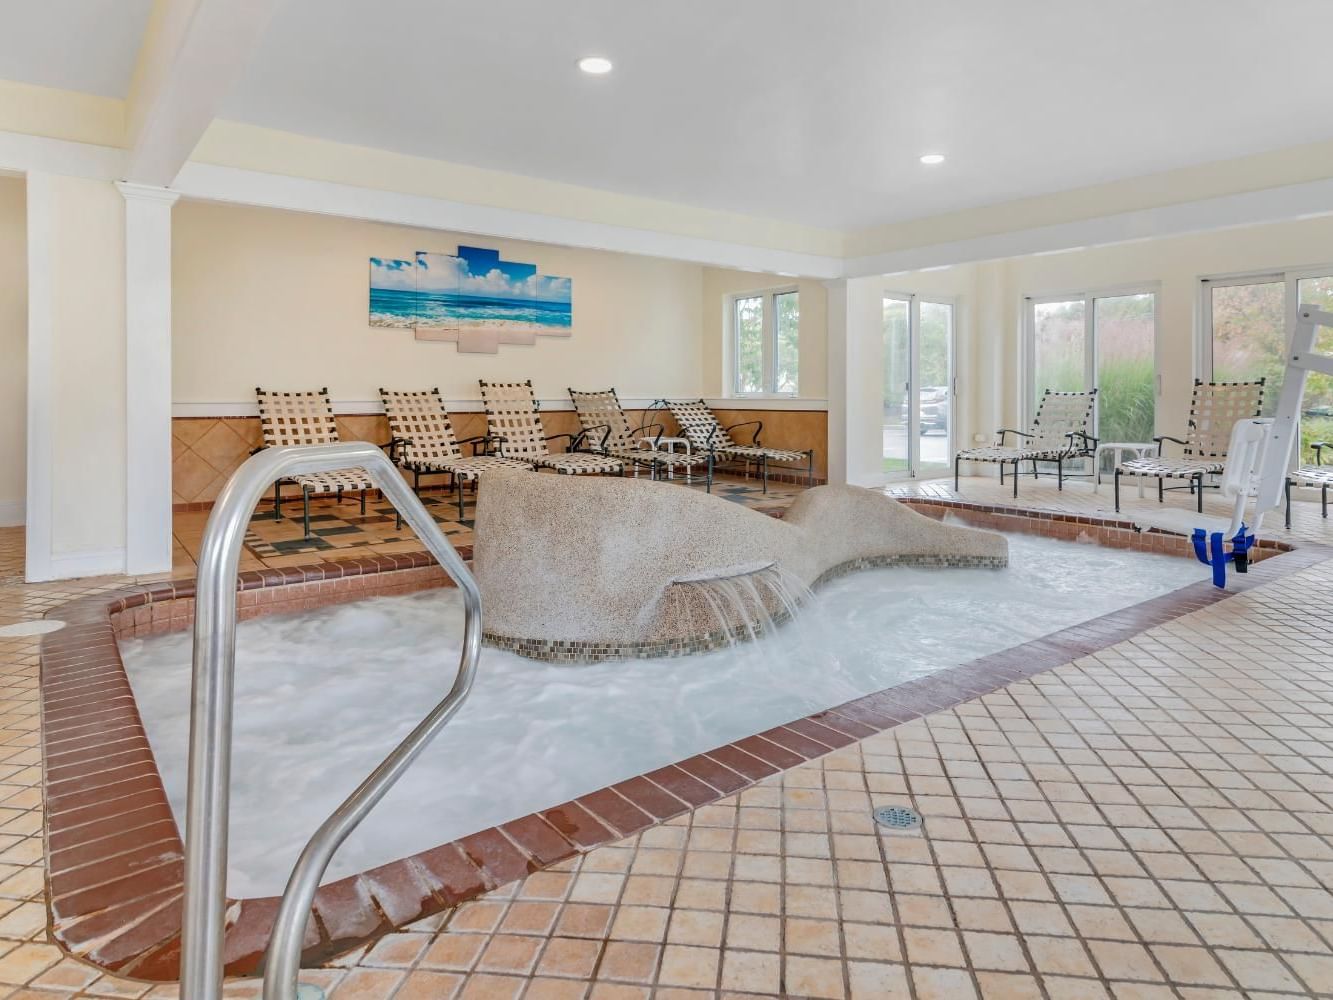 Serene spa setting with hot tub & lounge chairs in Day Spa at Meadowmere Resort